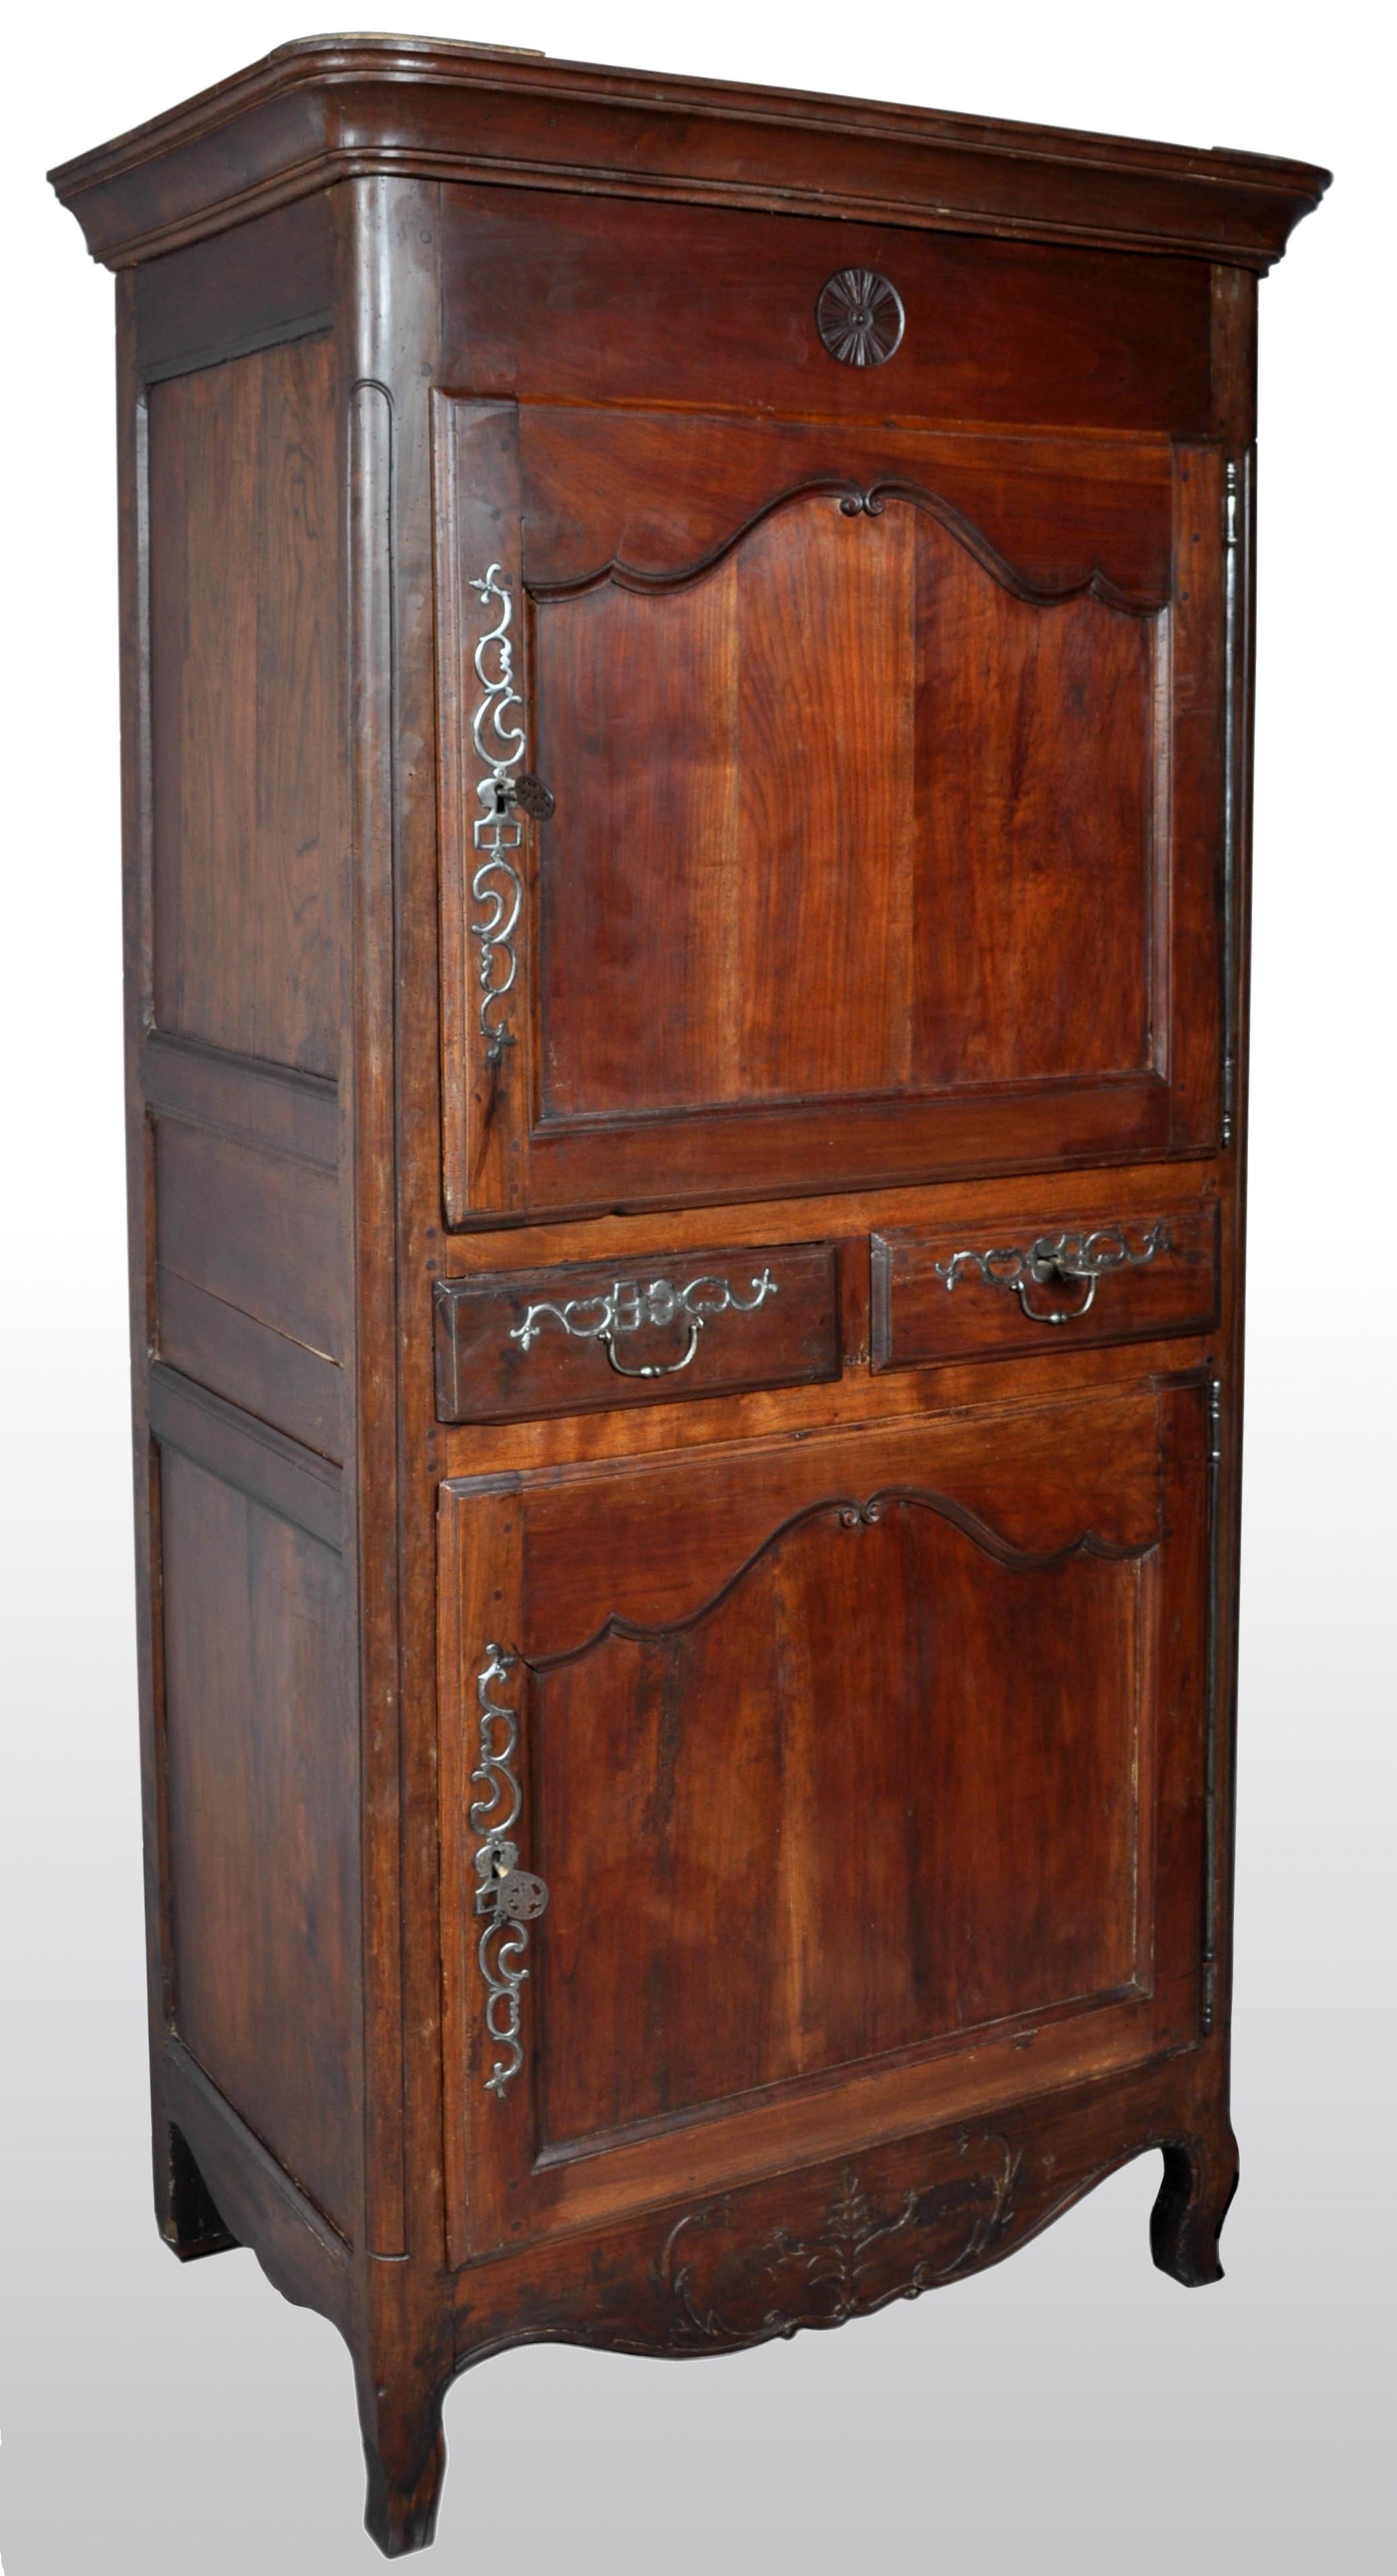 Antique French Provincial Louis XV fruitwood Bonnetiere / armoire / cabinet, circa 1770. The cabinet having a removable stepped cornice with a pair of paneled doors below and intersected to the middle by a pair of drawers. The cabinet having the